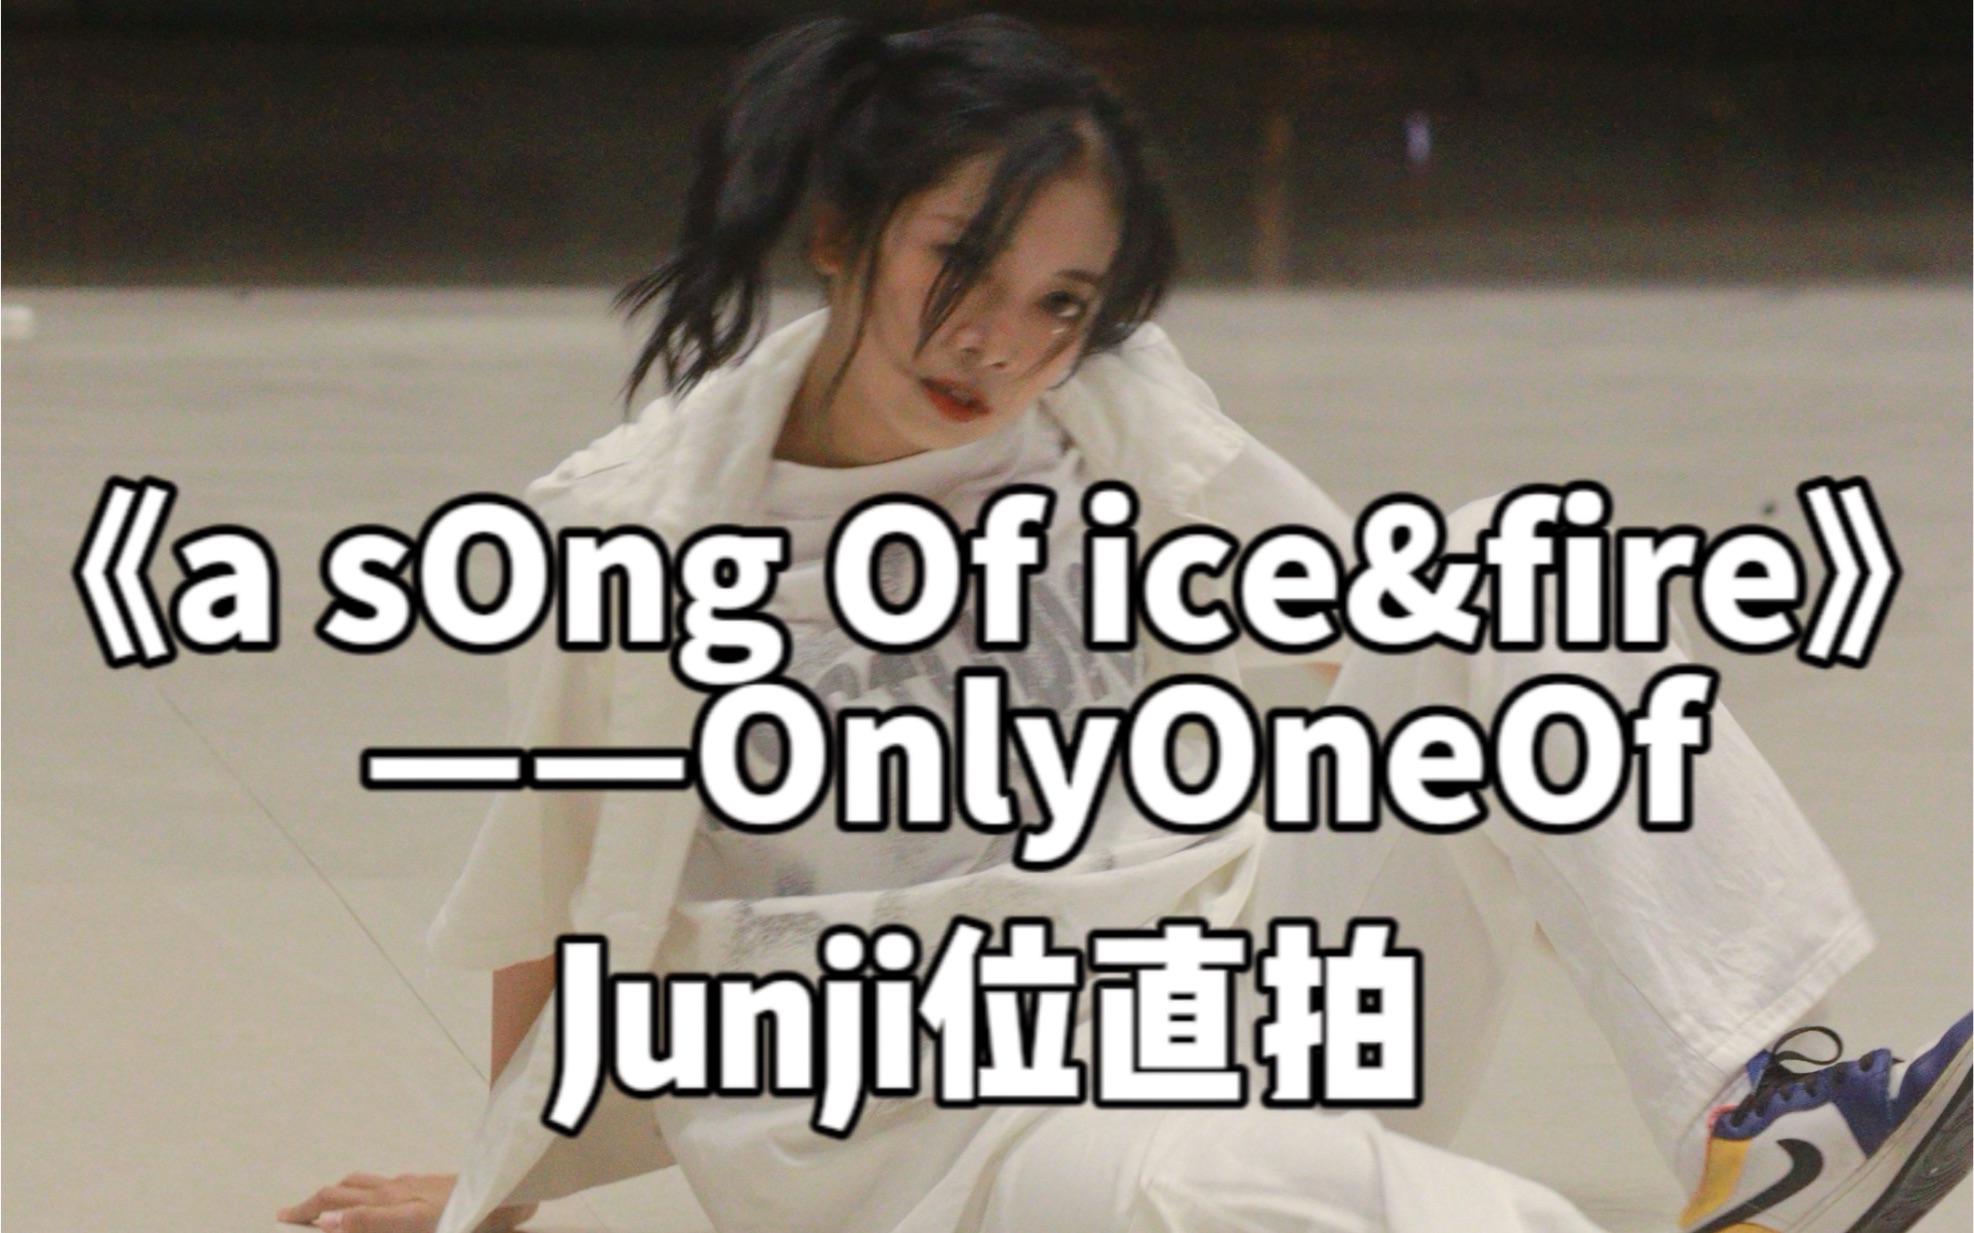 【OnlyOneOf｜翻跳】金俊炯位《a sOng Of ice&fire》路演直拍（feat.不听话的头发）